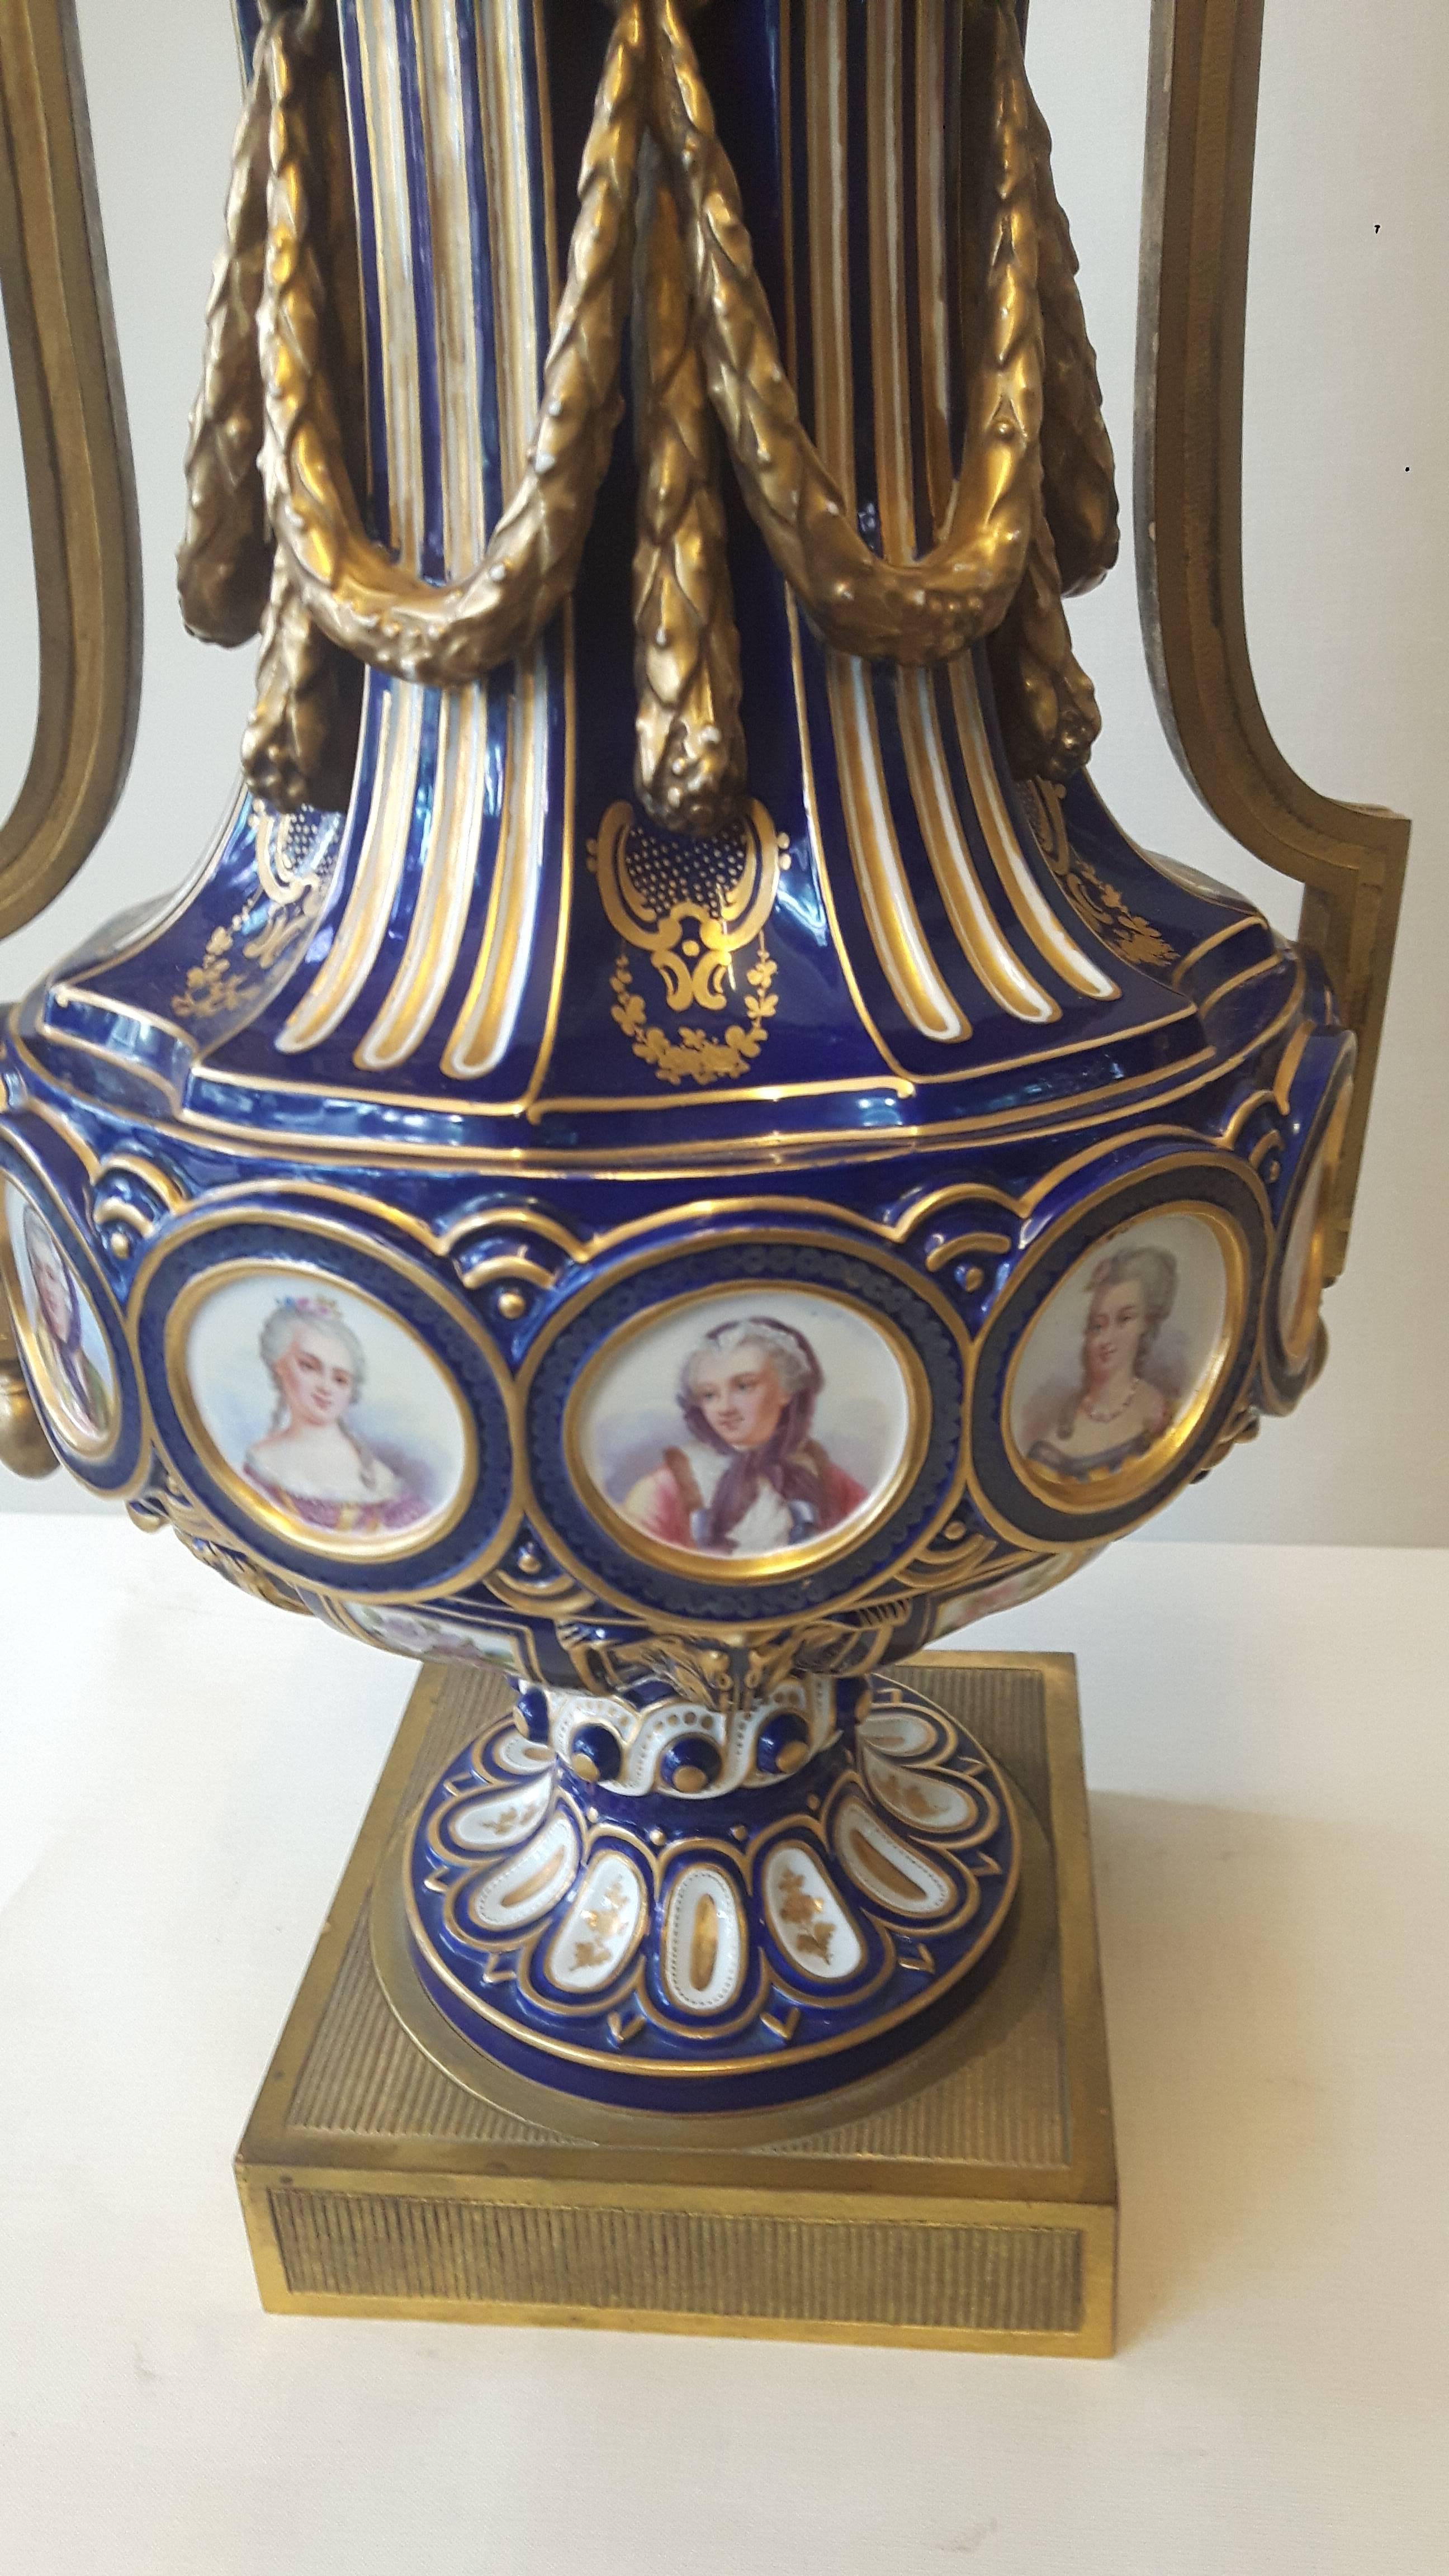 An important pair of Louis XIV Sèvres style vases, hand-decorated with cartouches of the king, his family and mistresses. The lids are moulded into crowns; wit moulded porcelain swags to embellish the body, the whole hand-painted and gilt to